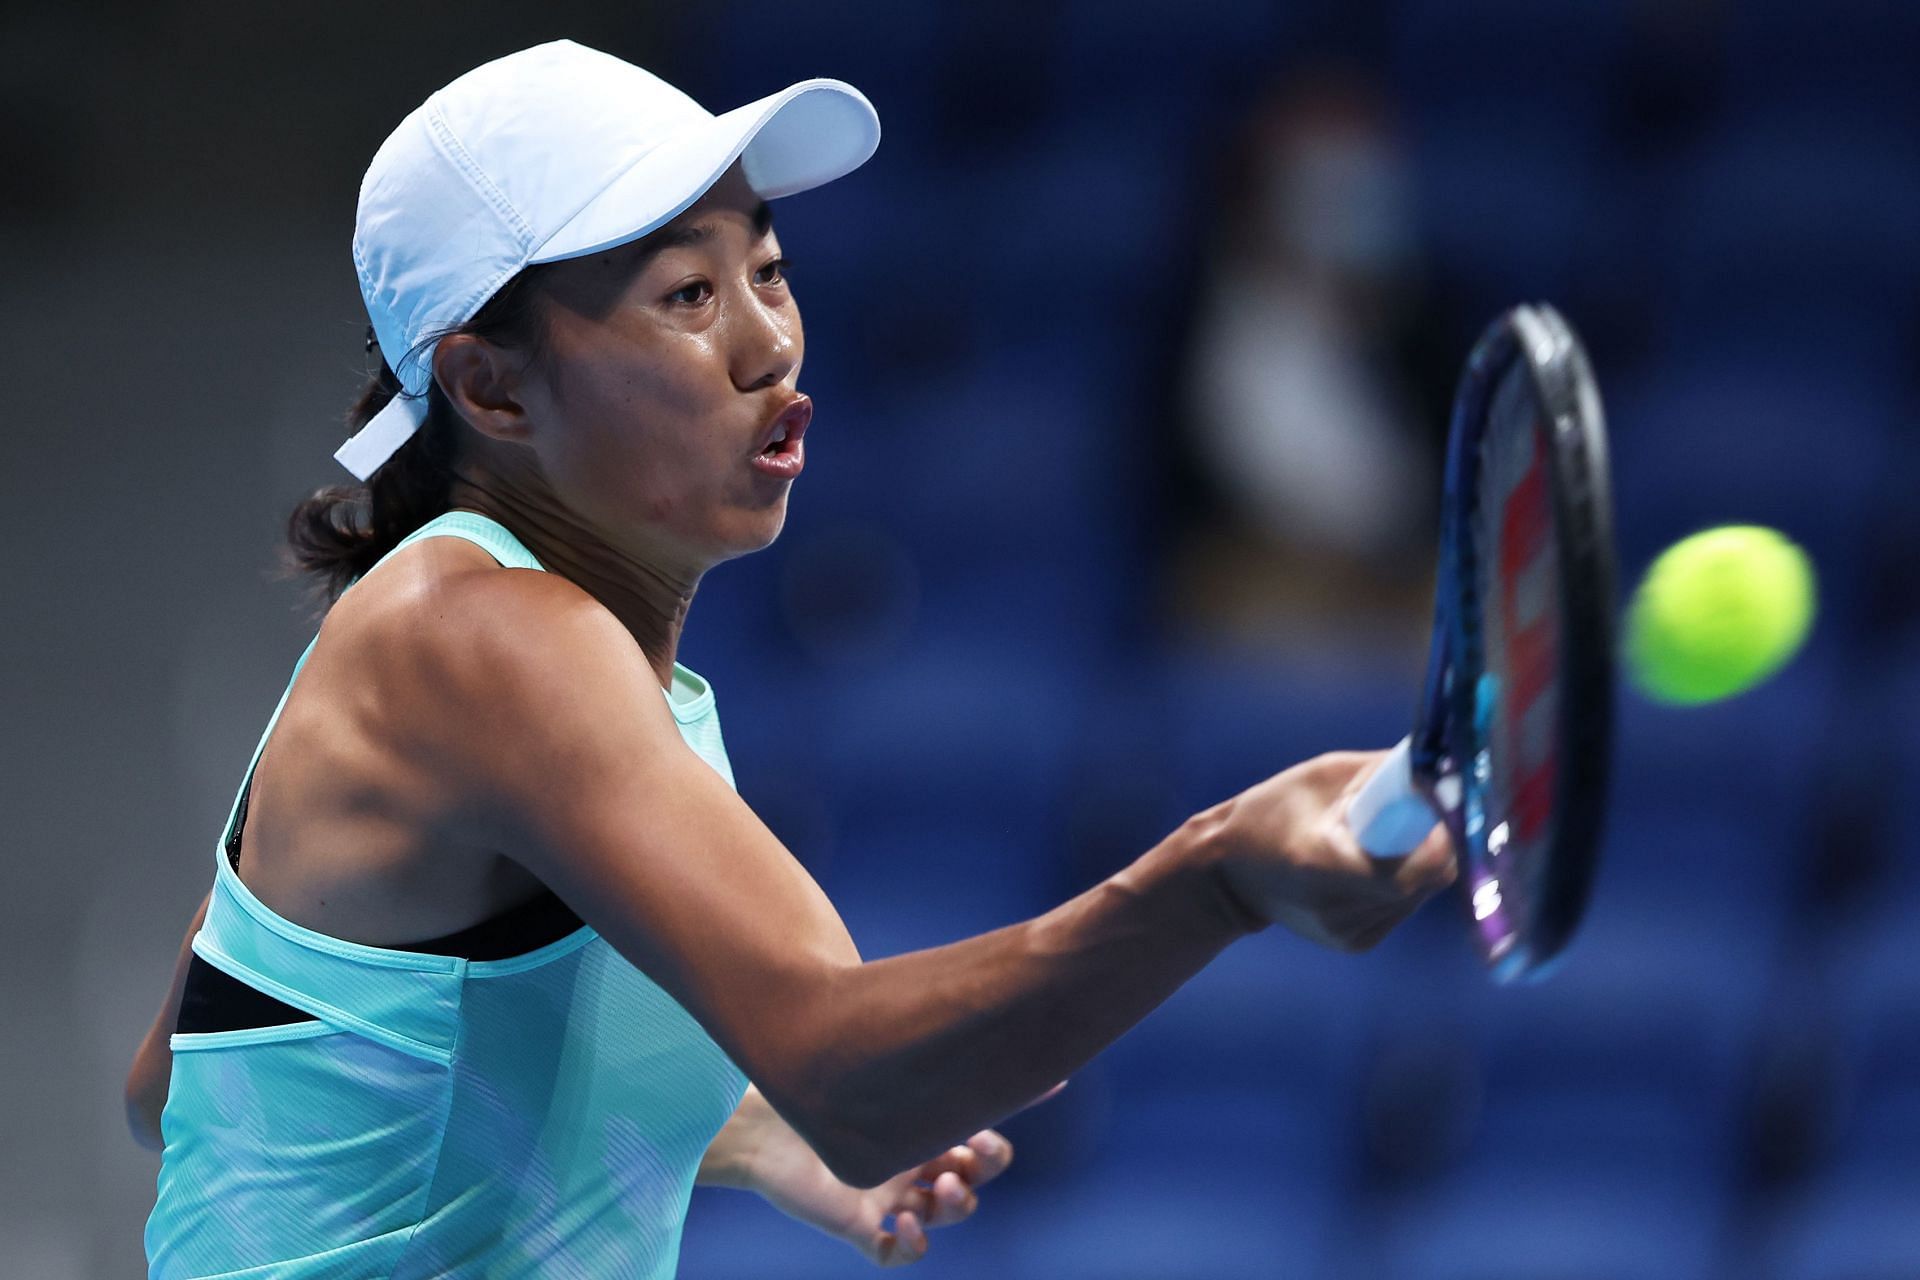 Shuai Zhang in action at the 2022 Toray Pan Pacific Open